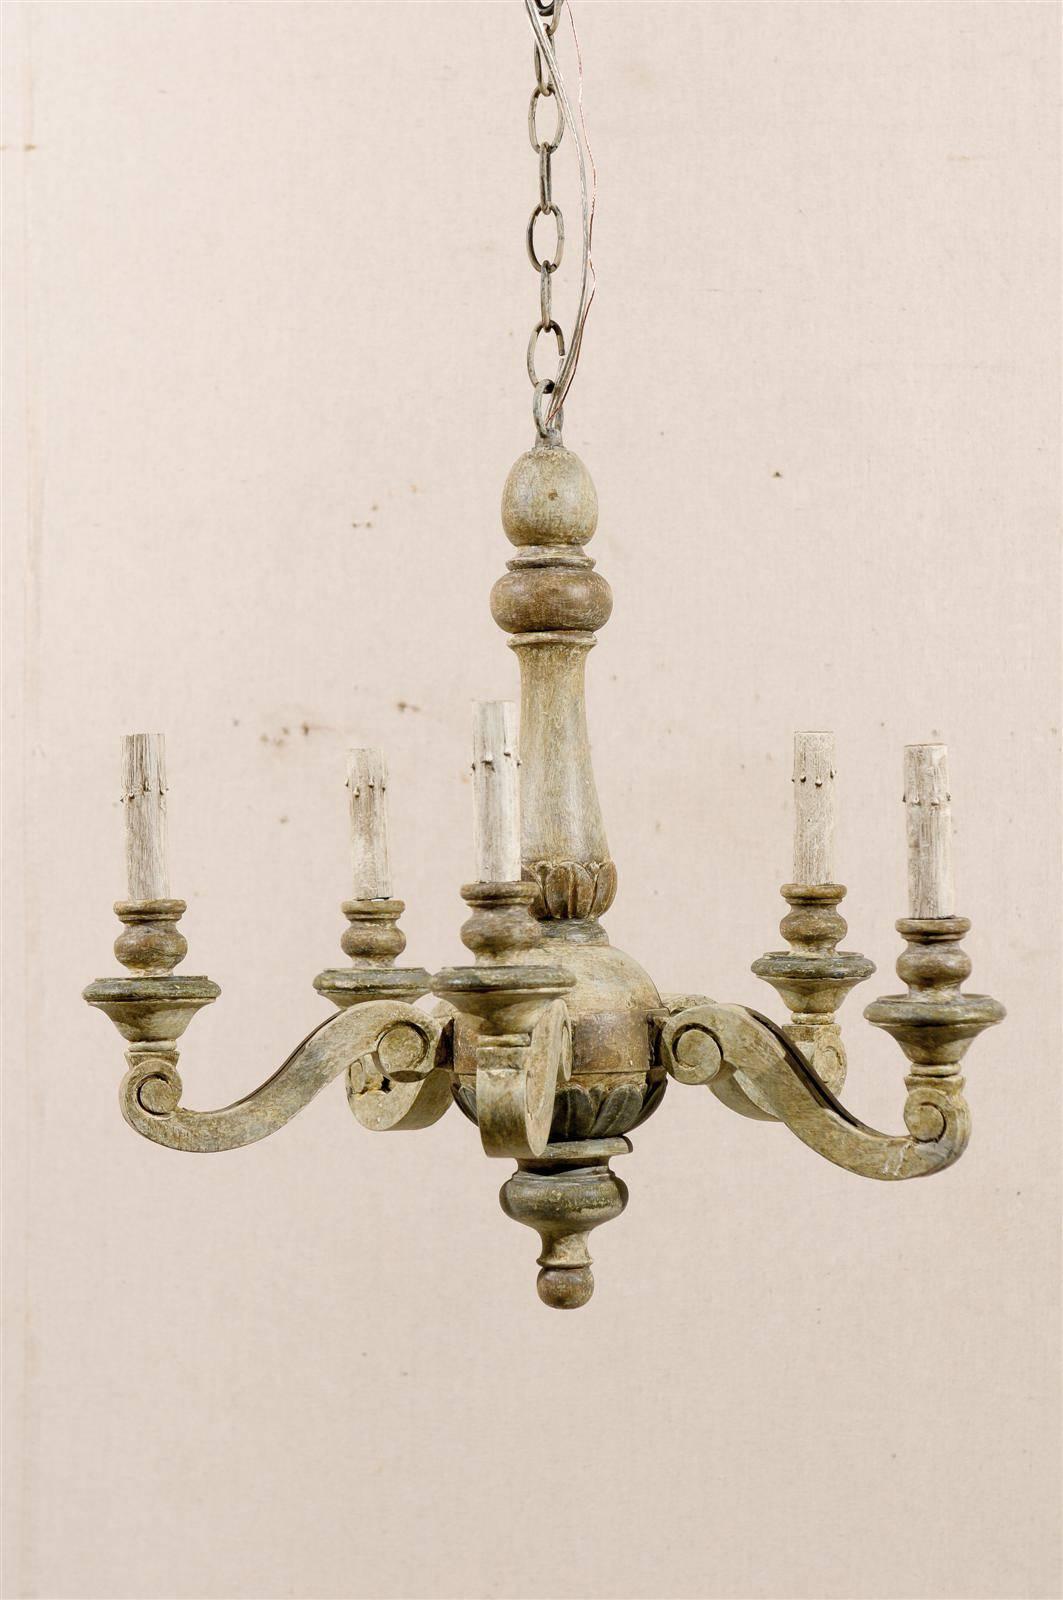 A French five-light chandelier from the mid-20th century. This French vintage painted wood chandelier features five s-scroll shaped arms supporting their wooden bobèches and painted candles sleeves. The general color is of a green with some grey